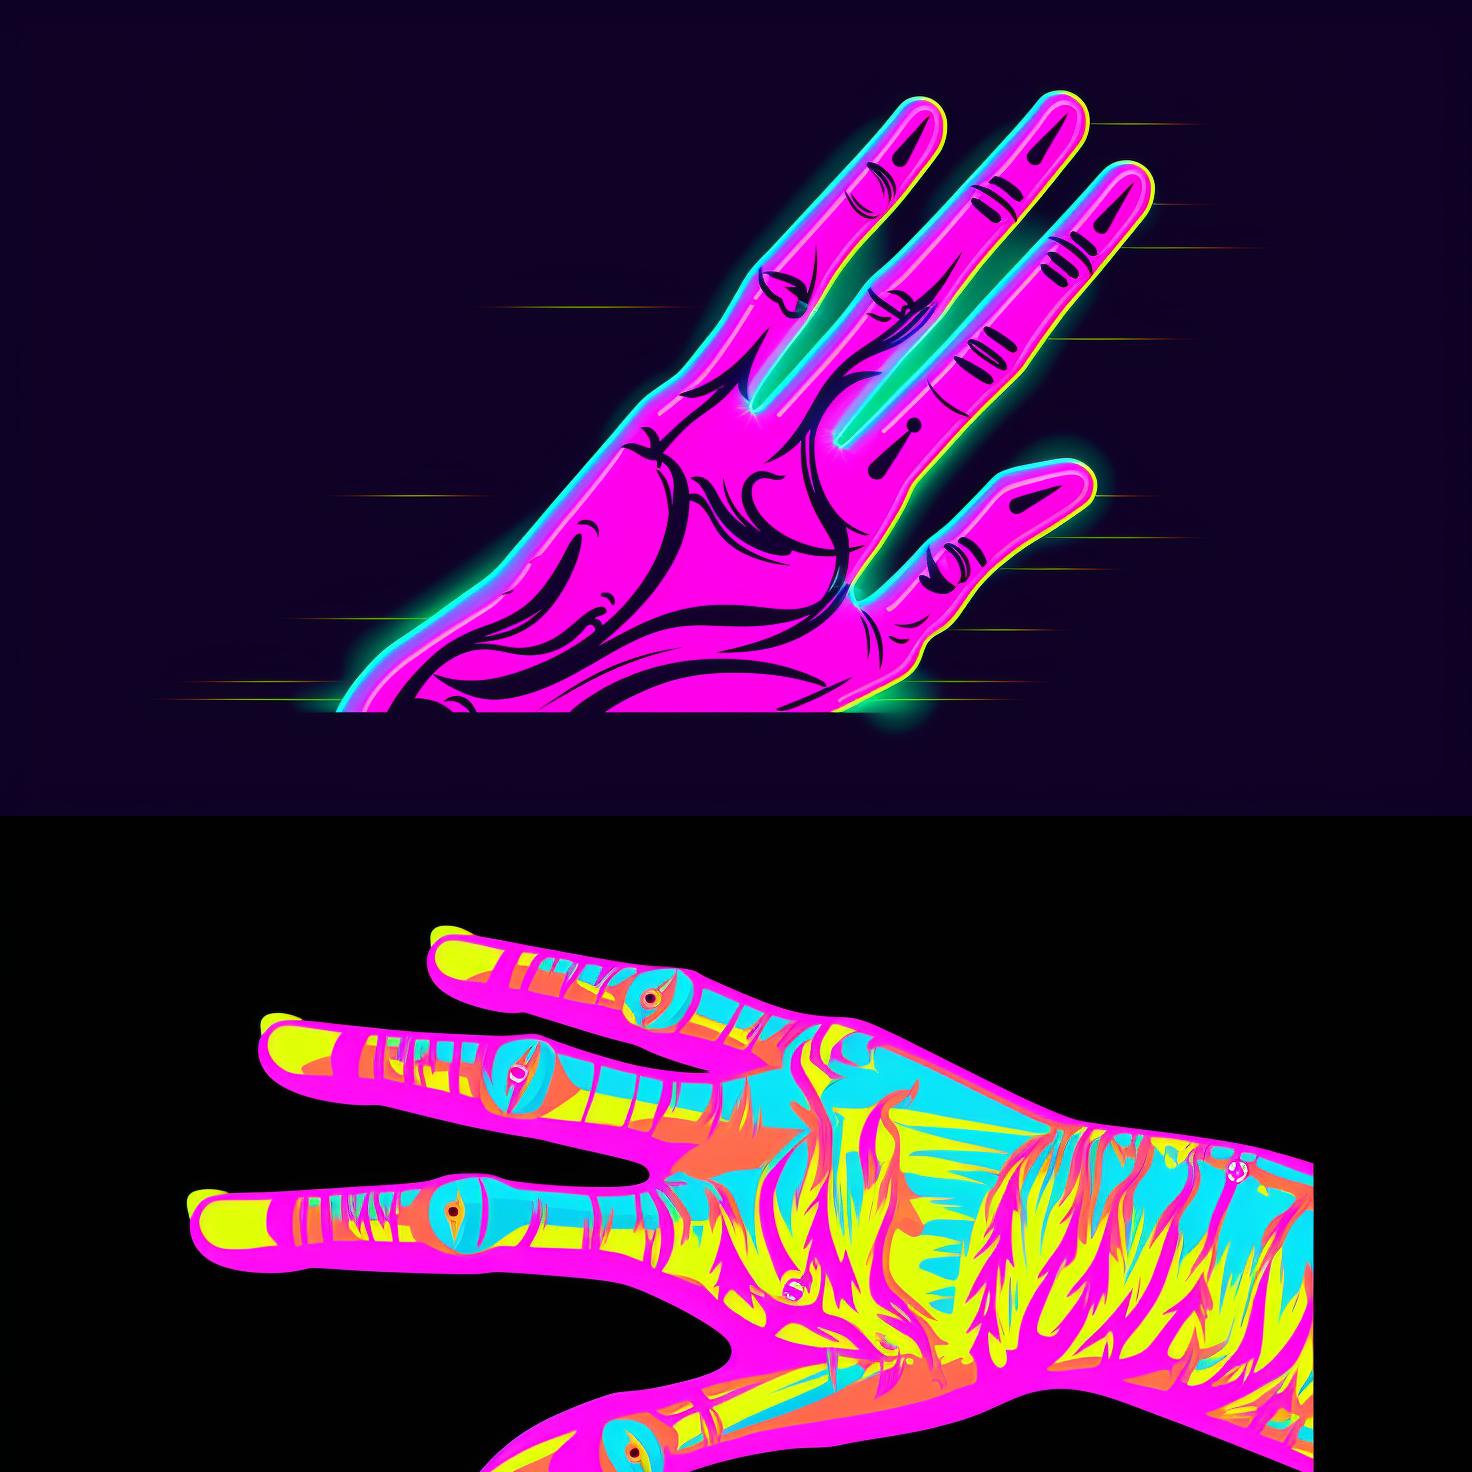 A hand with nails painted in bright neon colors.